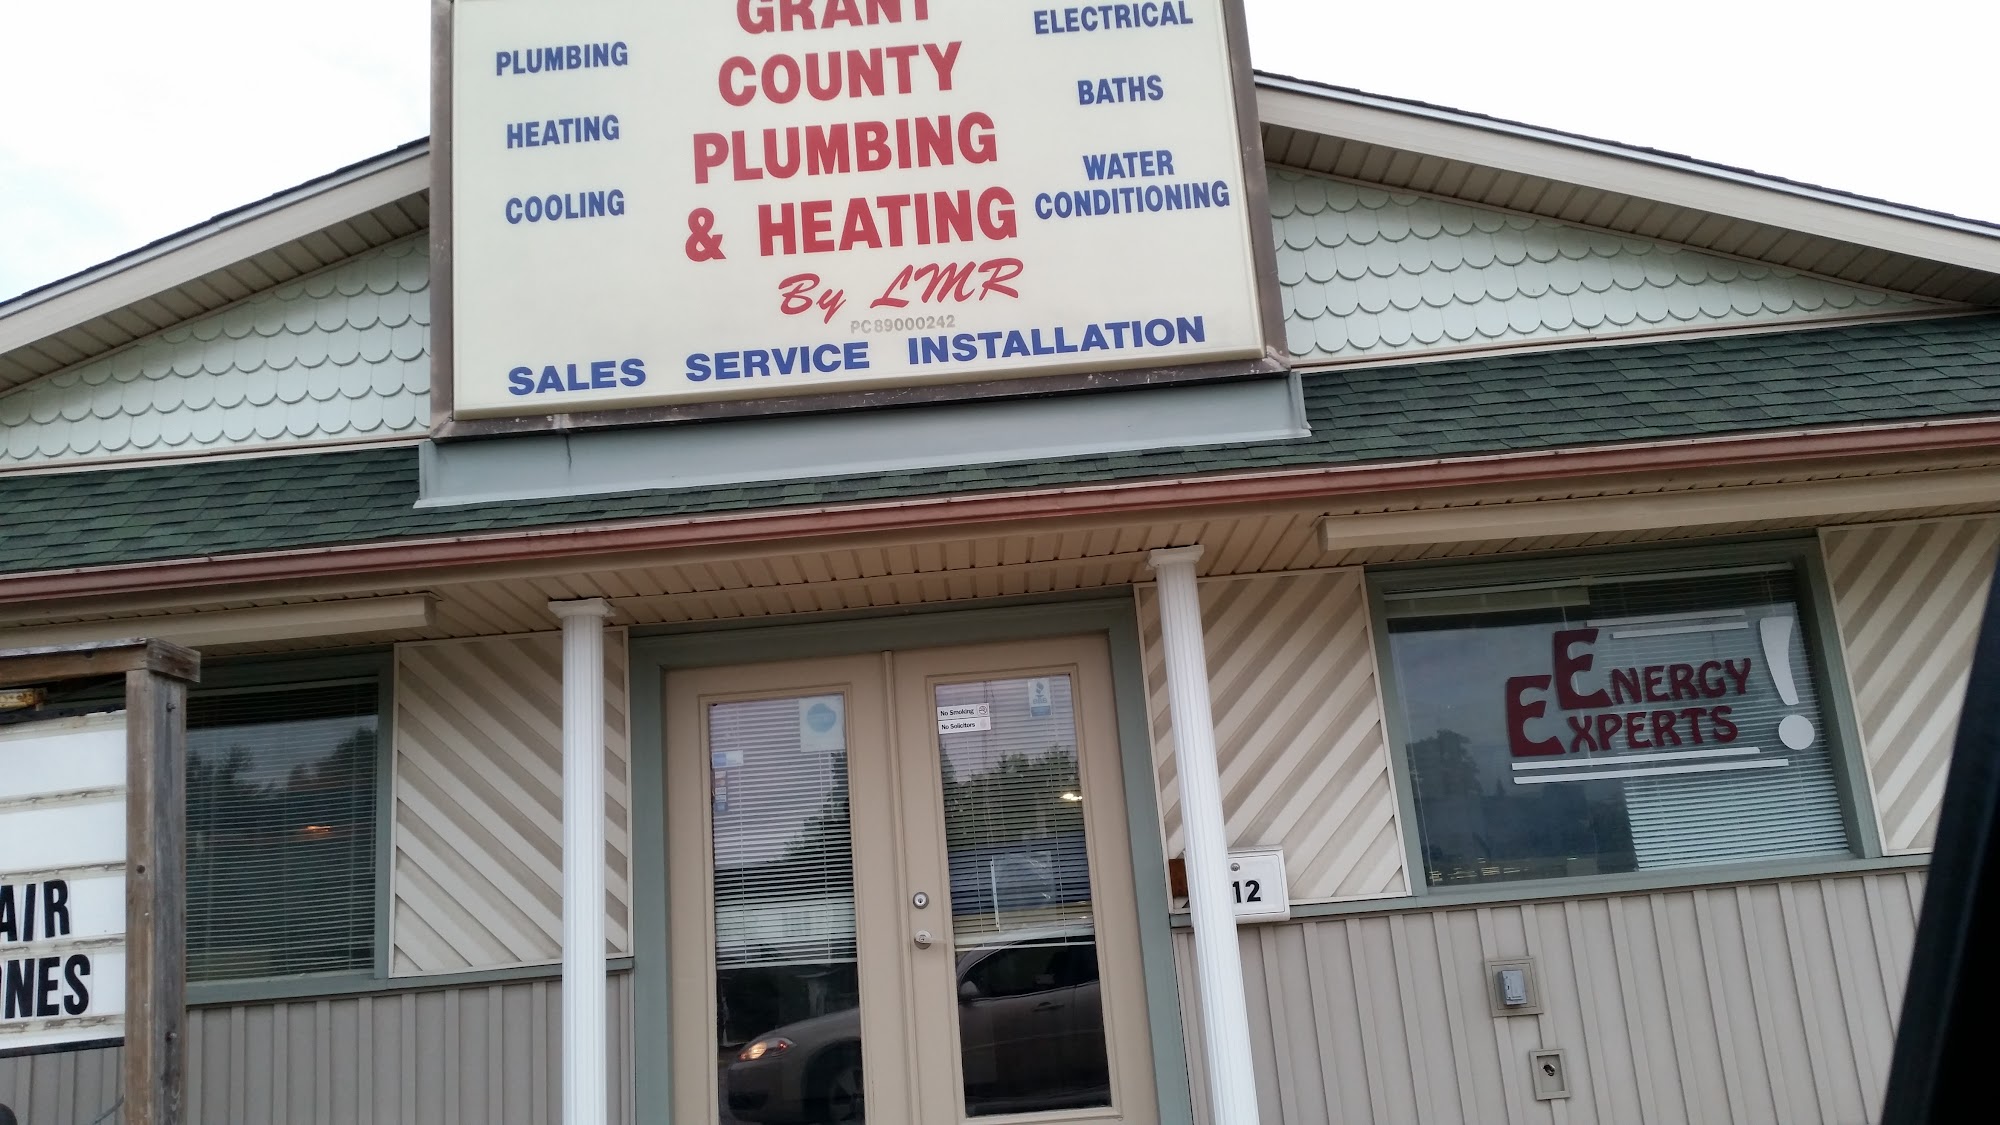 Grant County Plumbing & Heating By LMR